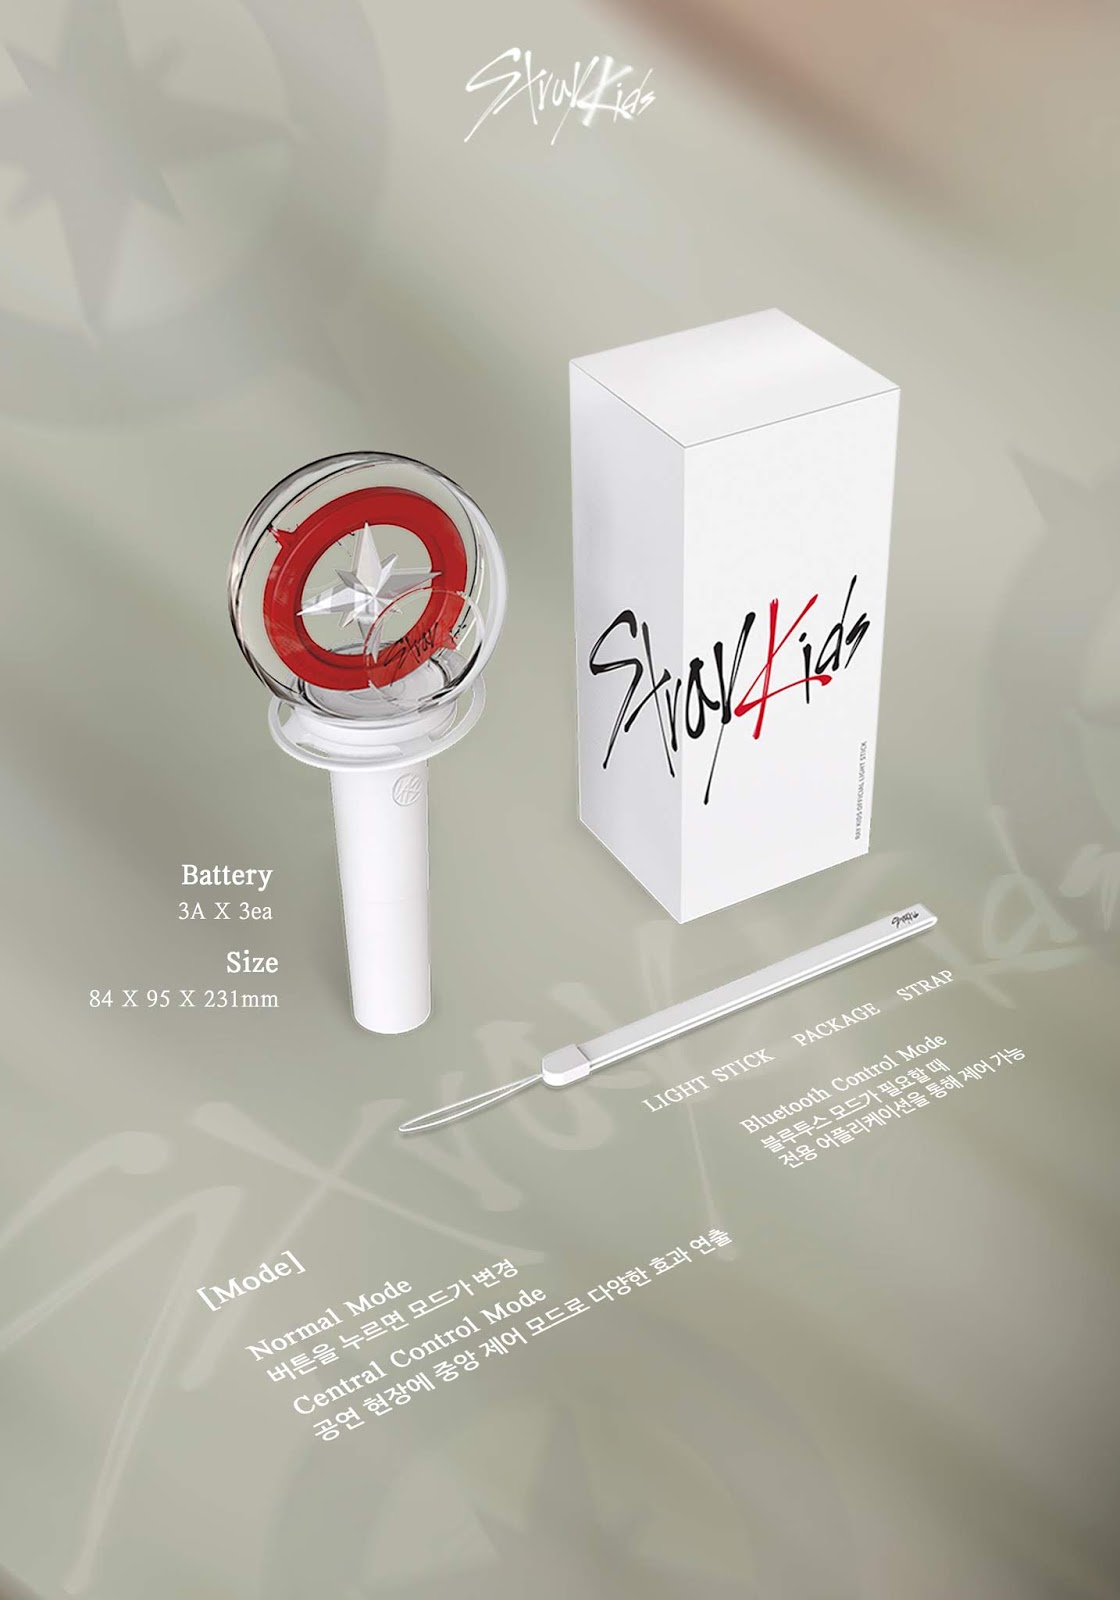 Will Sale Soon, Stray Kids Reveals Their Official Lightstick Design